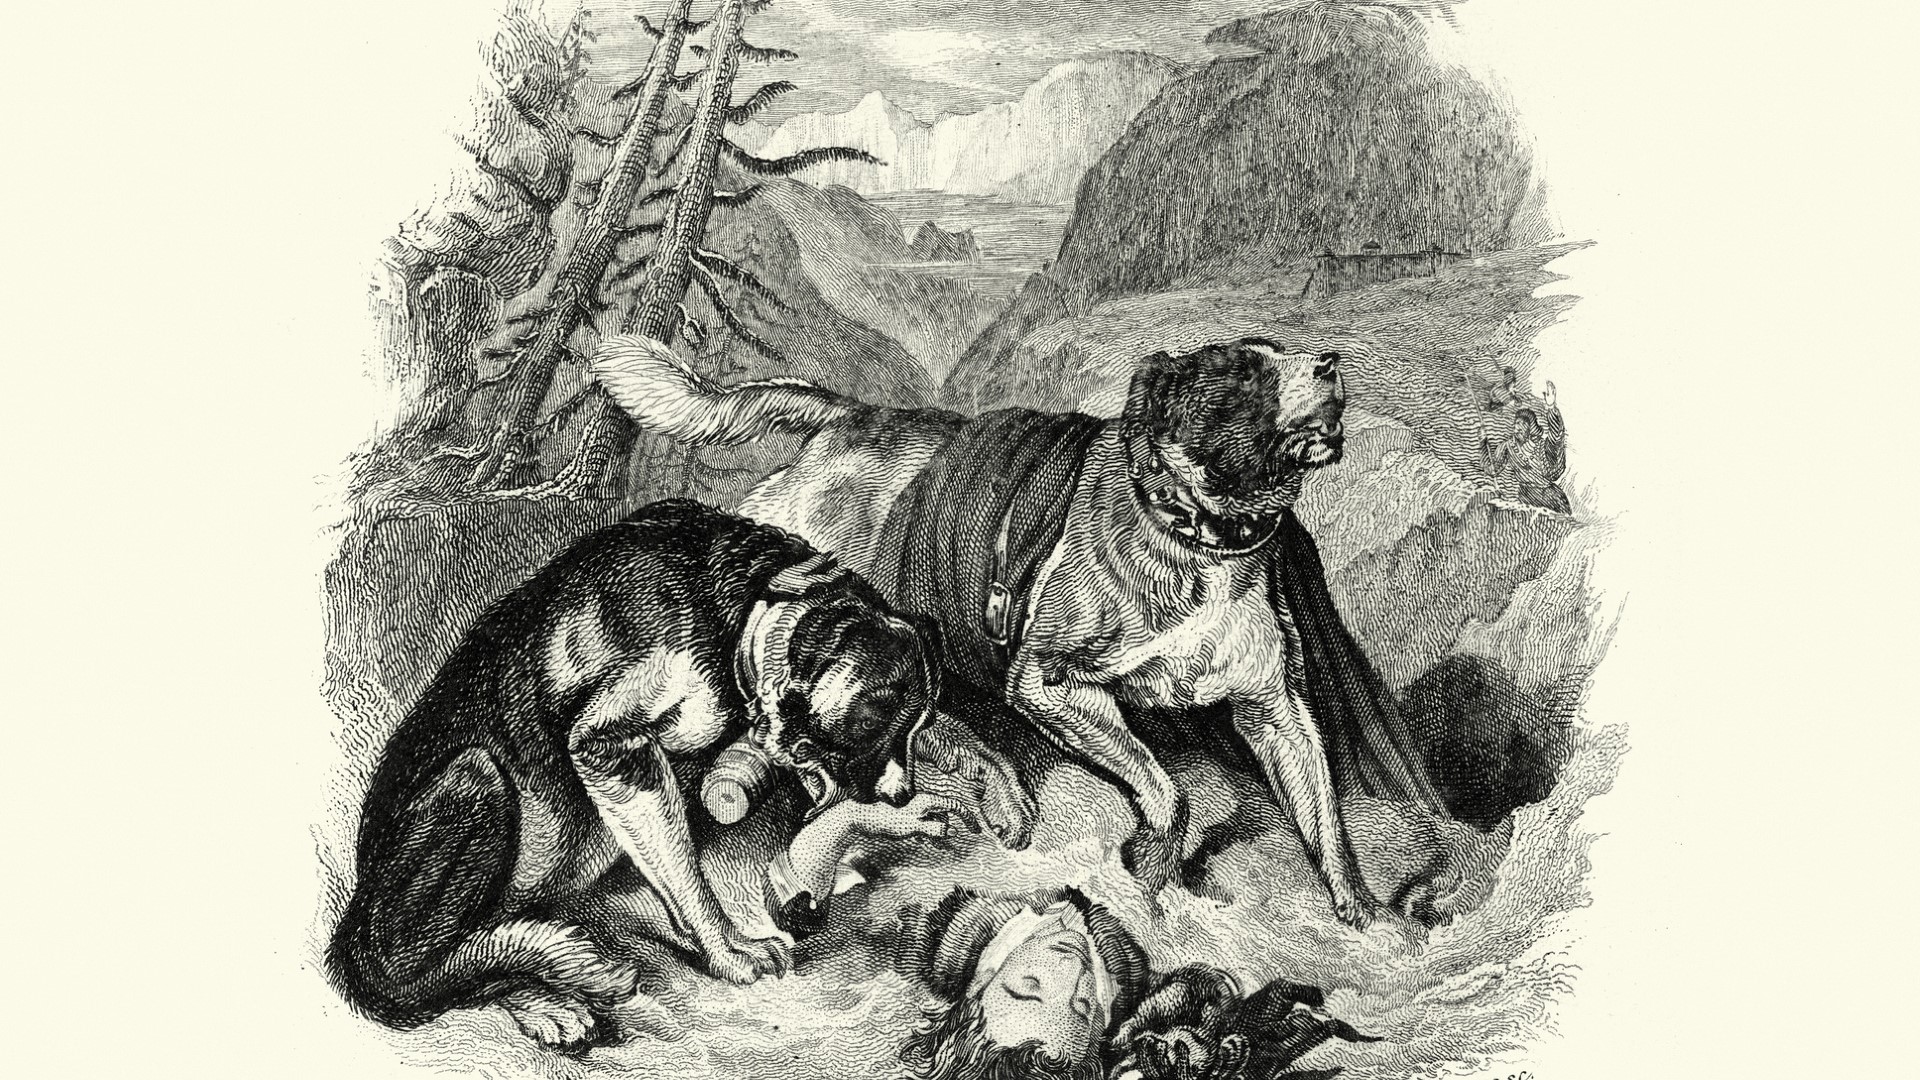 A vintage painting of Swiss search and rescue Saint Bernards